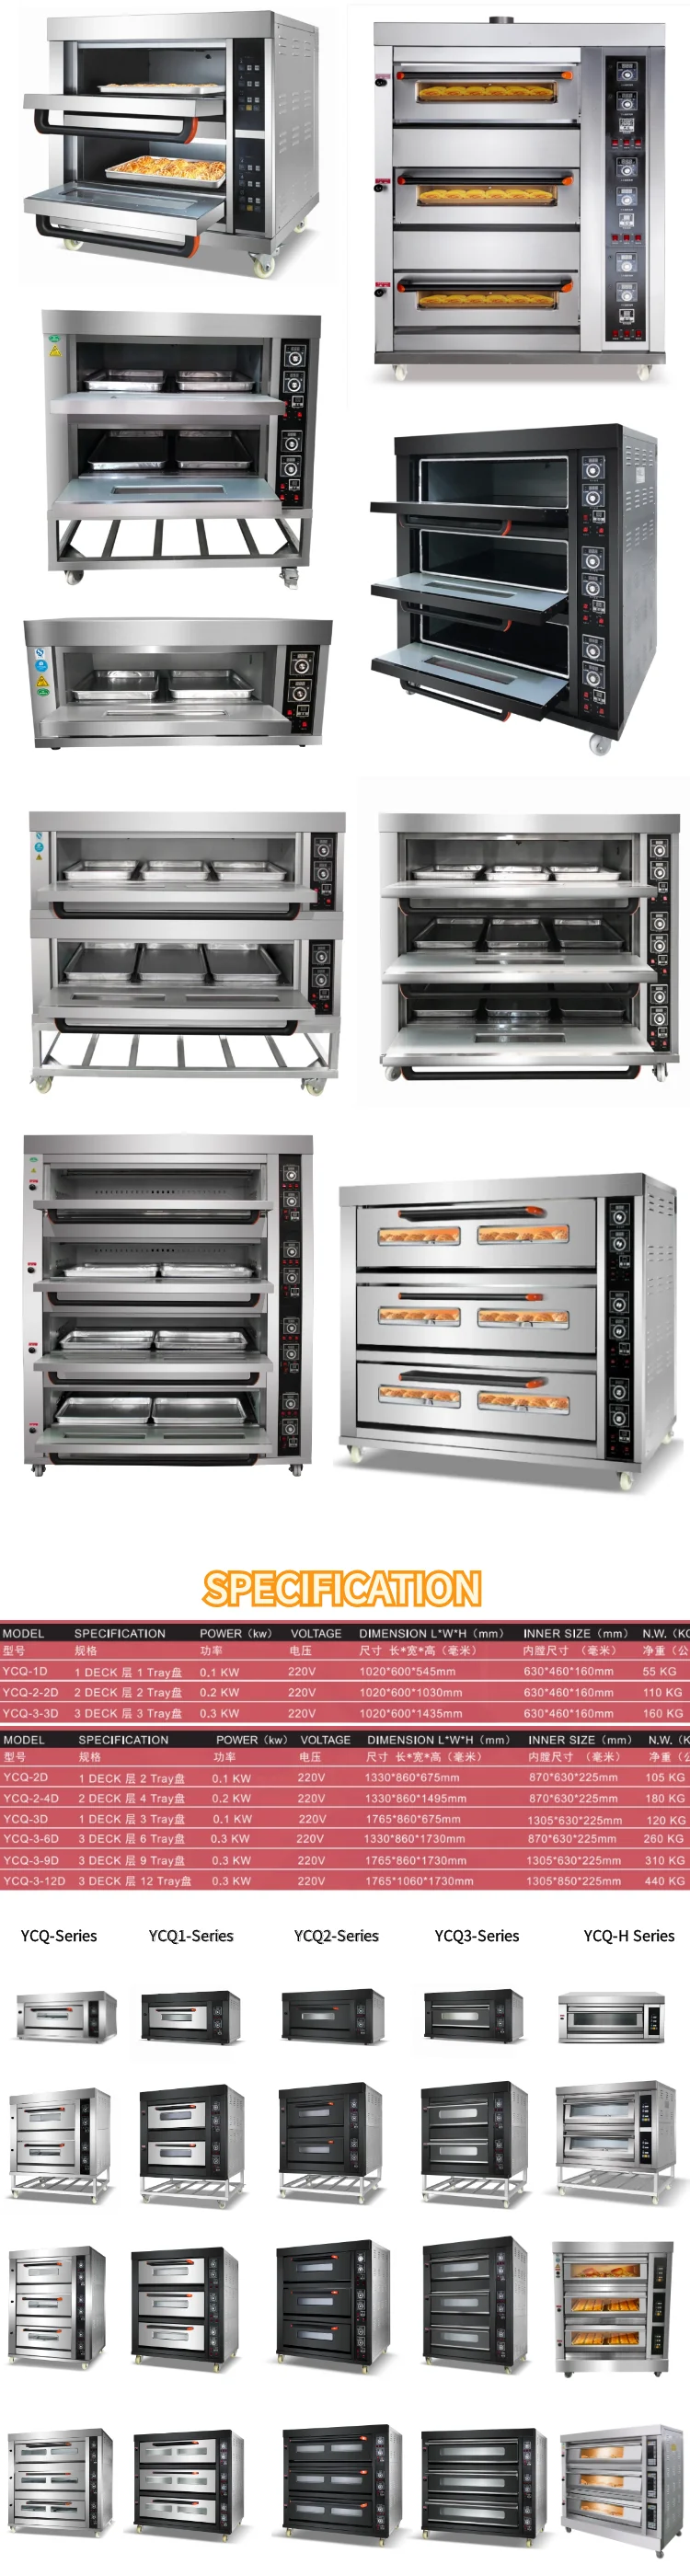 Industrial big pizza 3 4 decks 9 12 16 trays gas power electric bread deck commercial oven bakery Equipment for baking cake sale